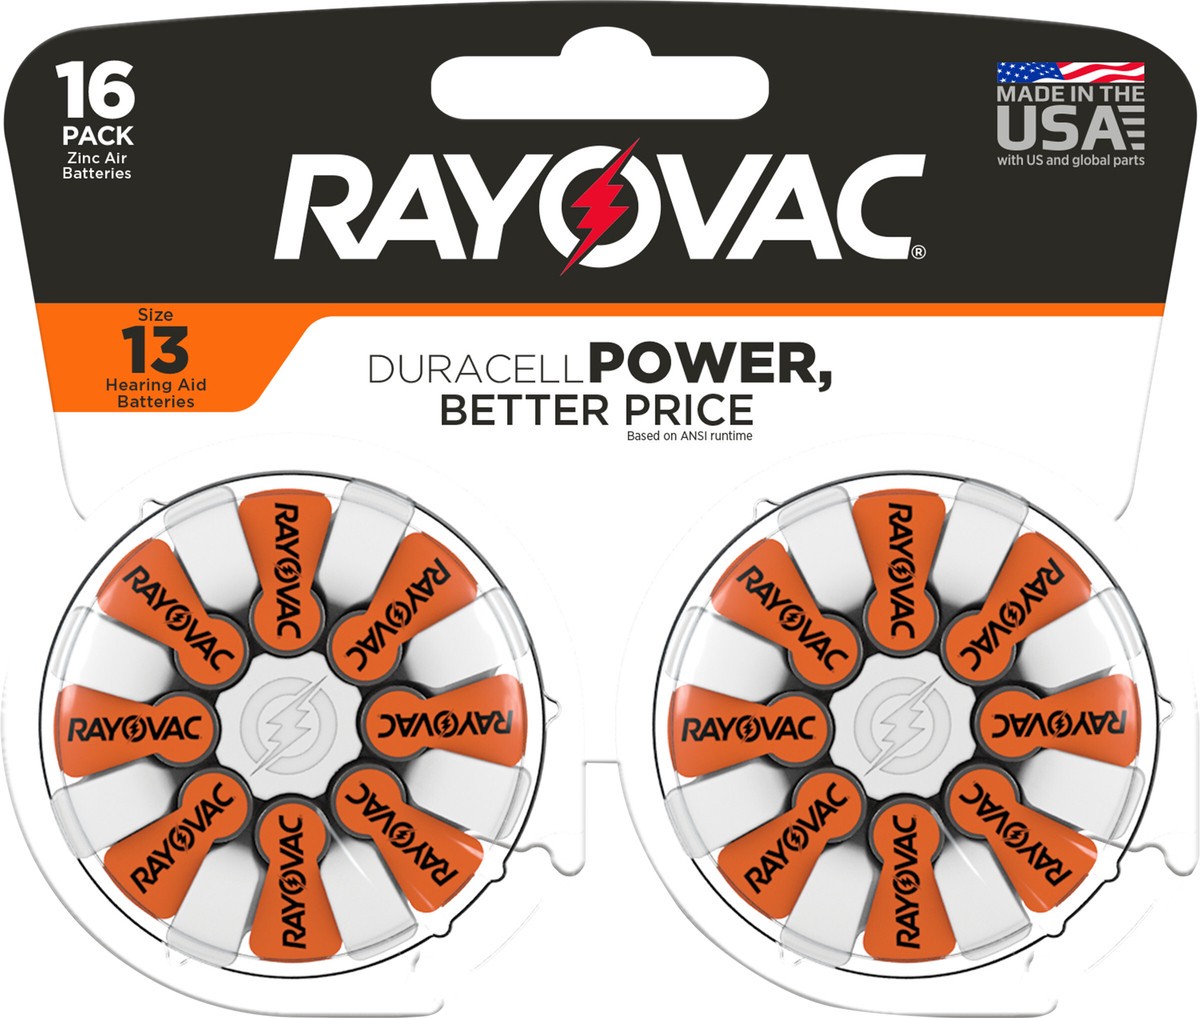 slide 3 of 3, Rayovac Size 13 Hearing Aid Batteries (16 Pack), Size 13 Batteries, 16 ct